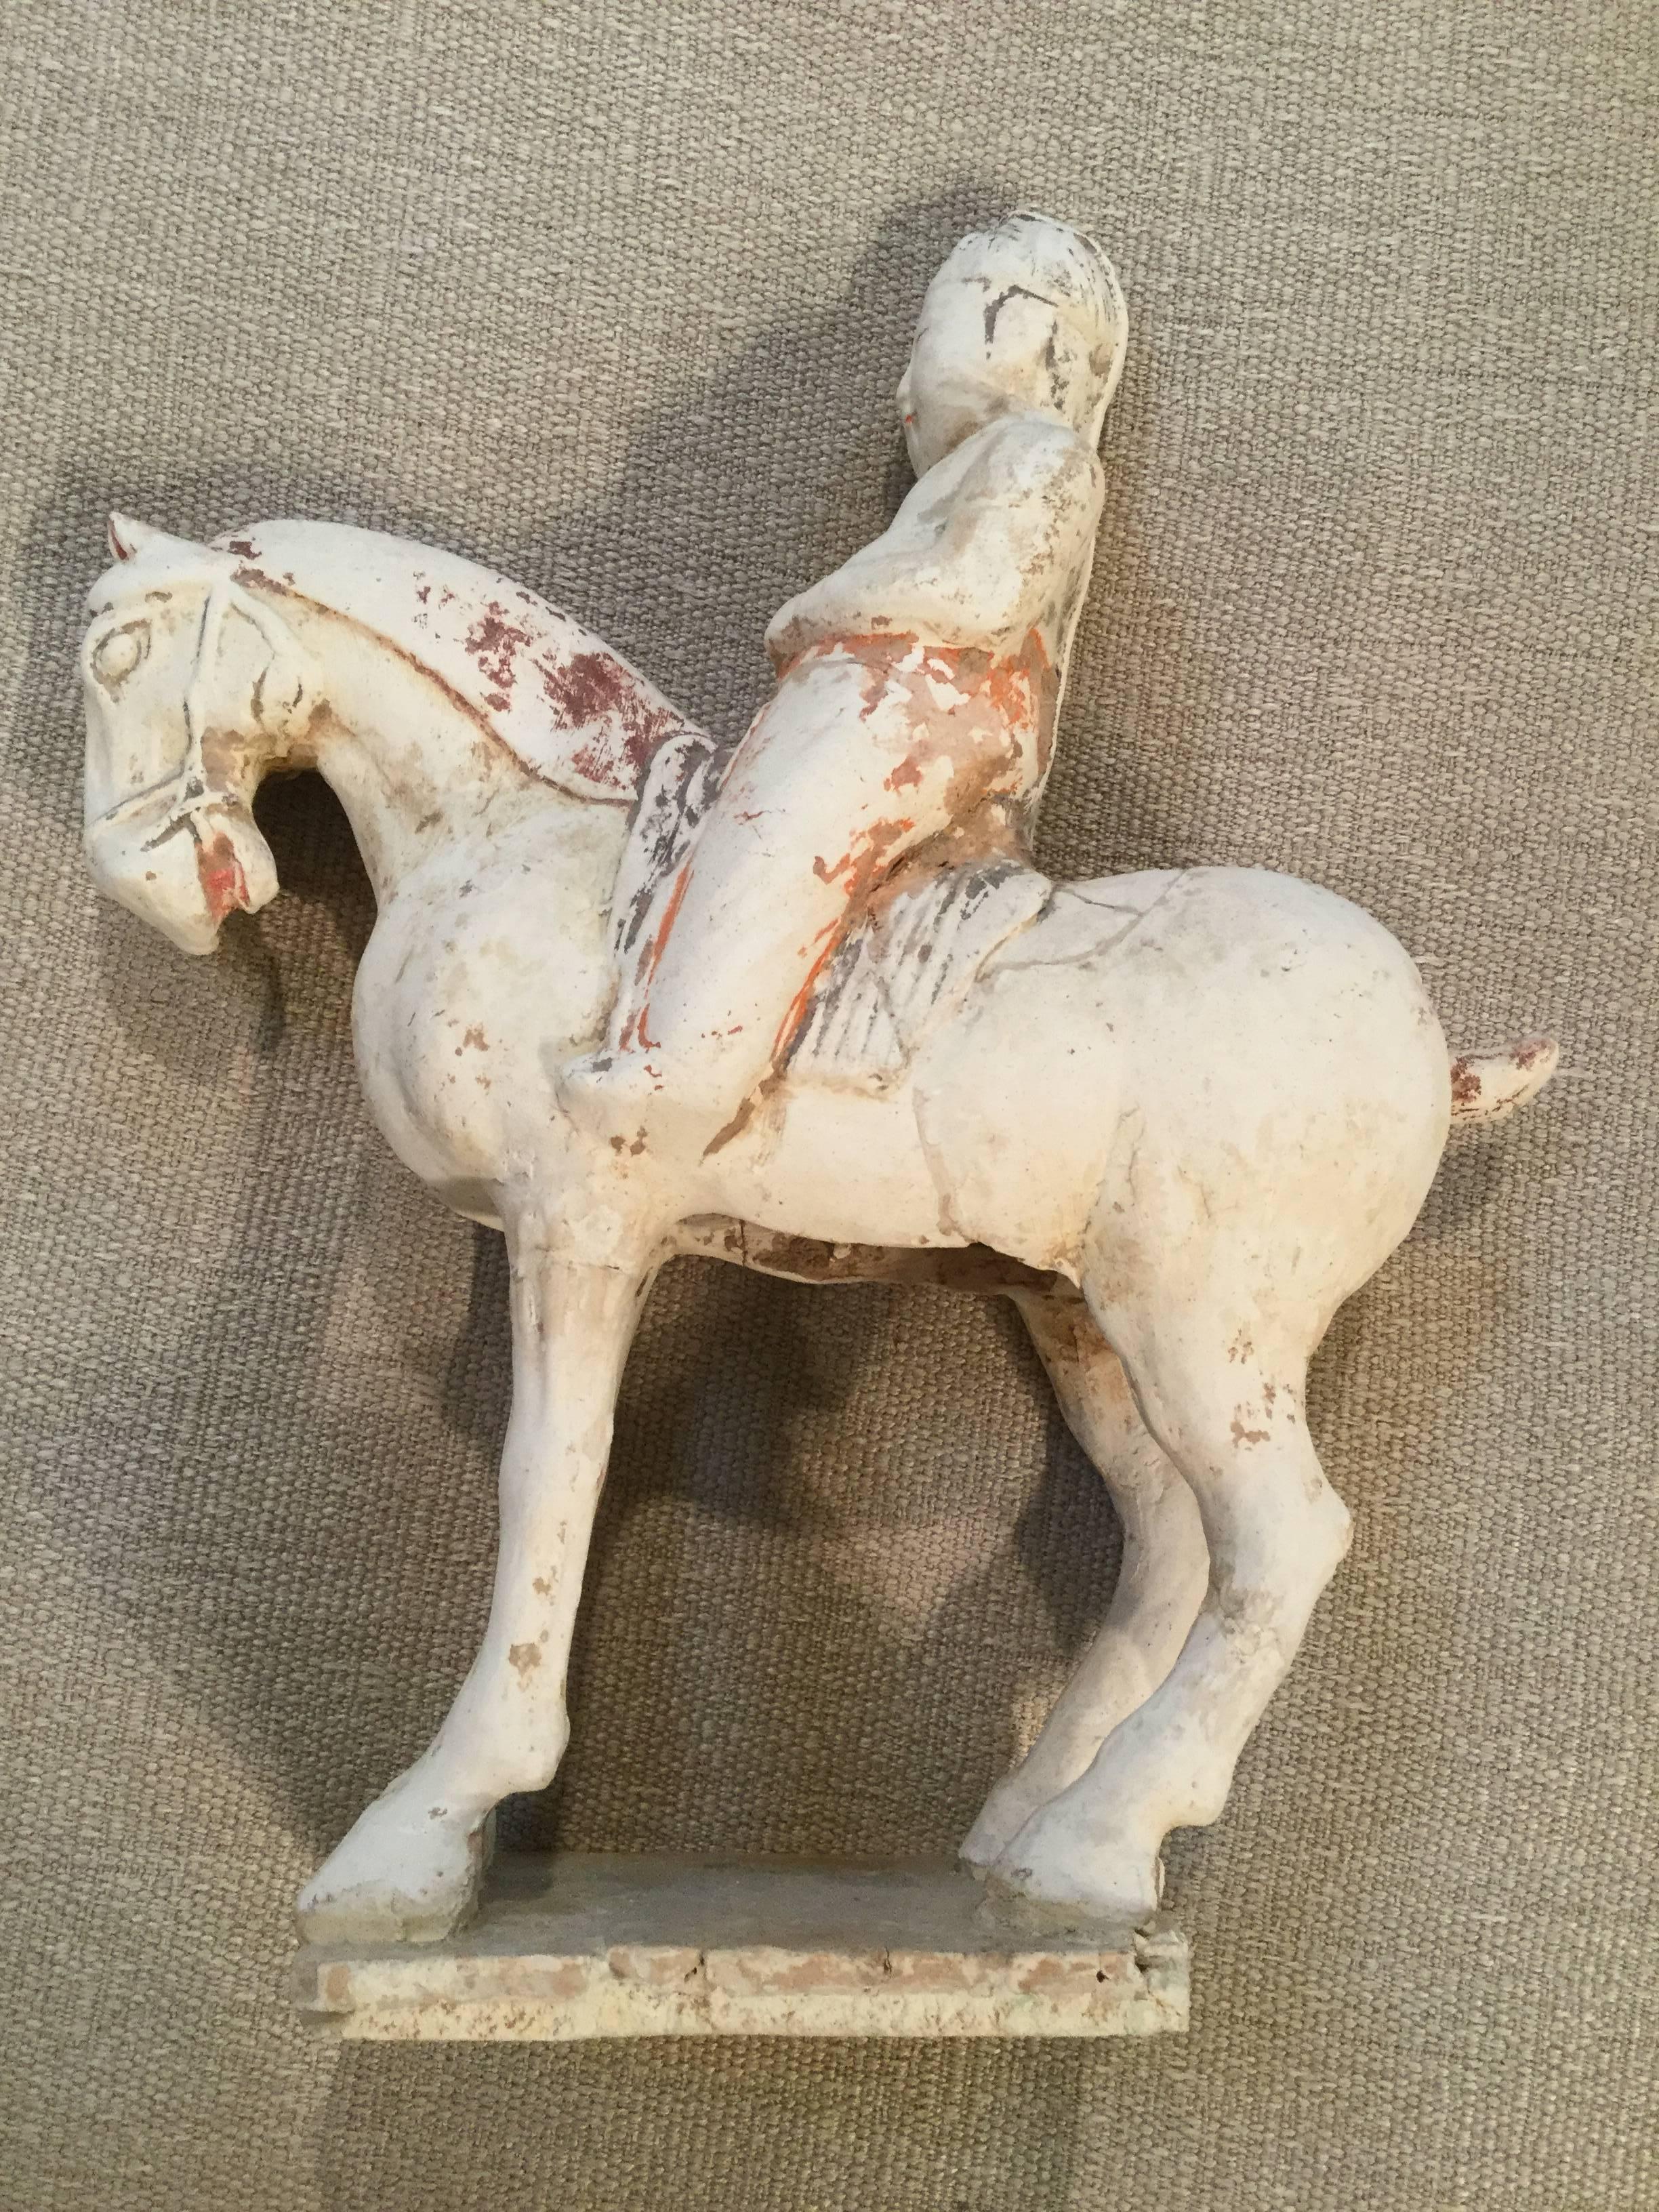 Made during the Sui Dynasty (581~618) pottery burial horse's age has been certificated by Oxford Authentication, Ltd. It is 14” high, 12” wide and 4” deep. It has repairs which appear to be very old. A custom-made stand is included.